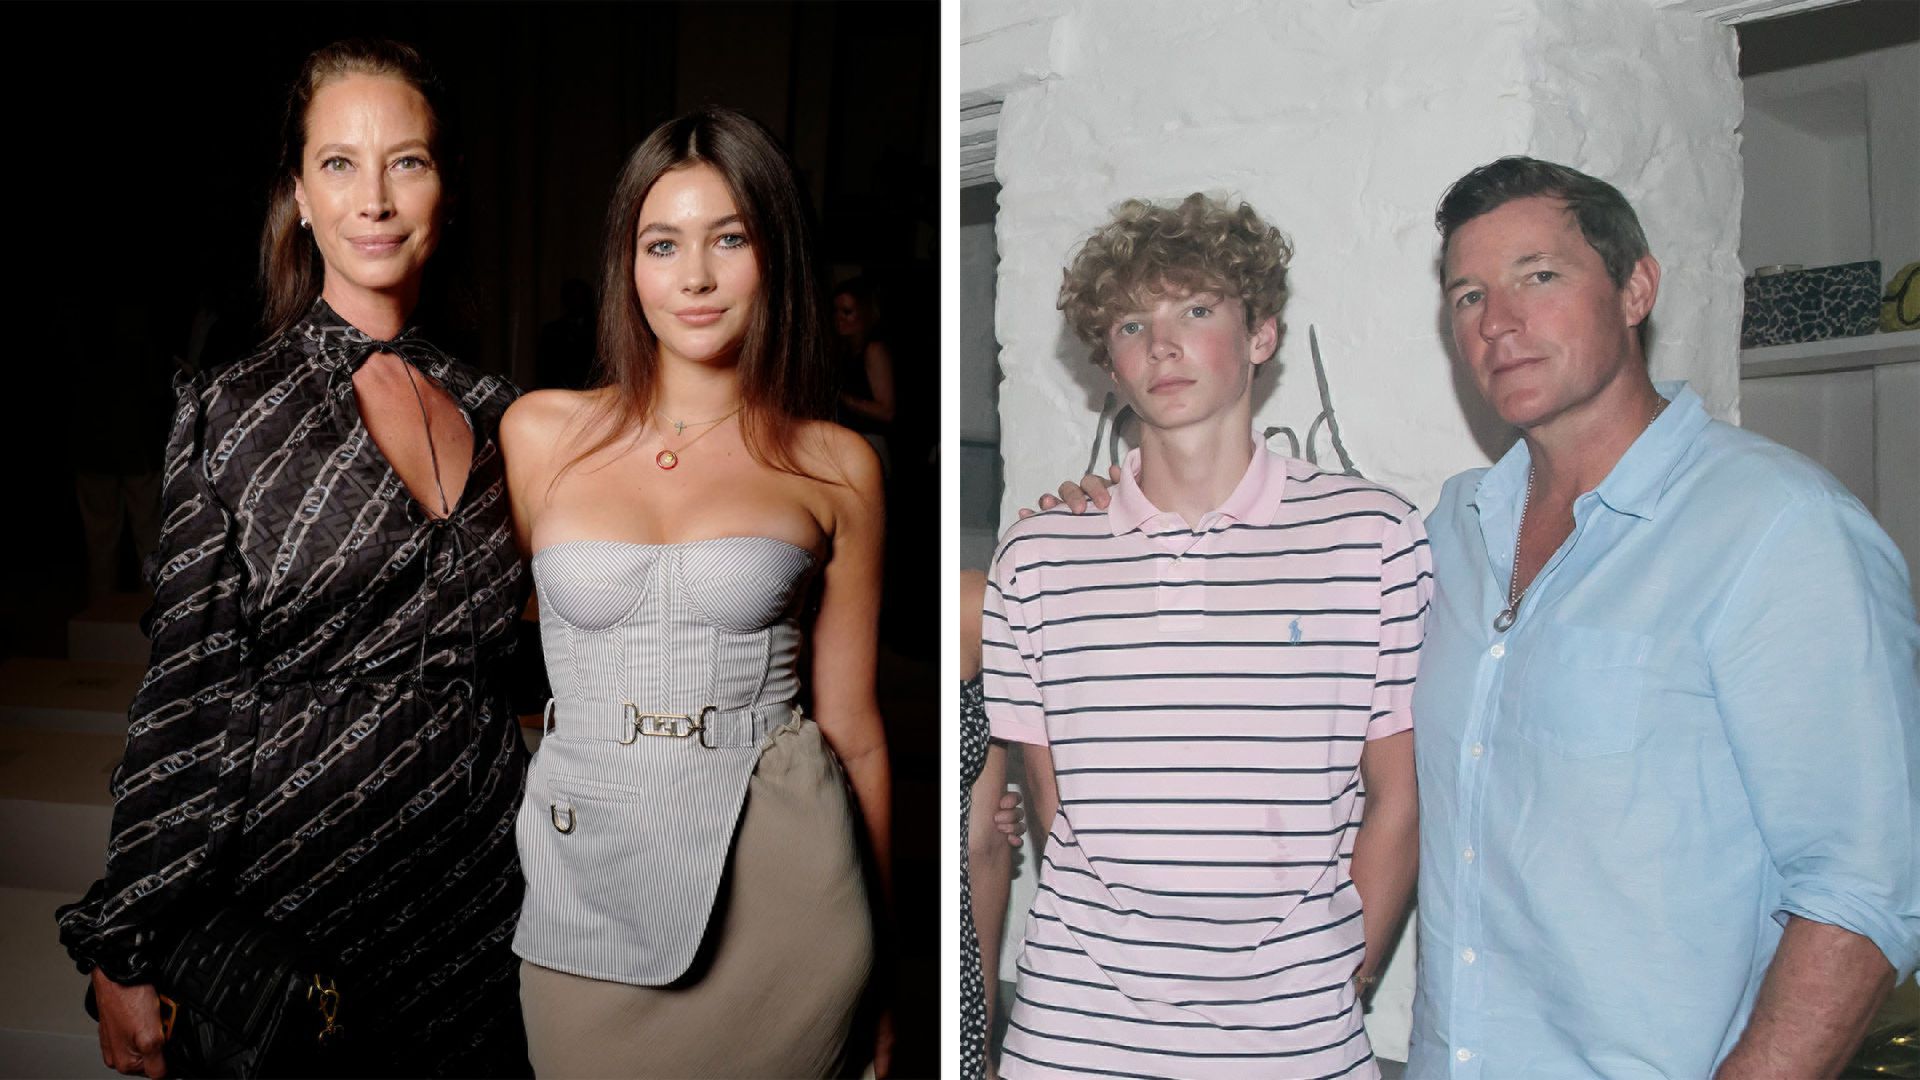 Meet Christy Turlington's lookalike daughter and son - Grace and Finn